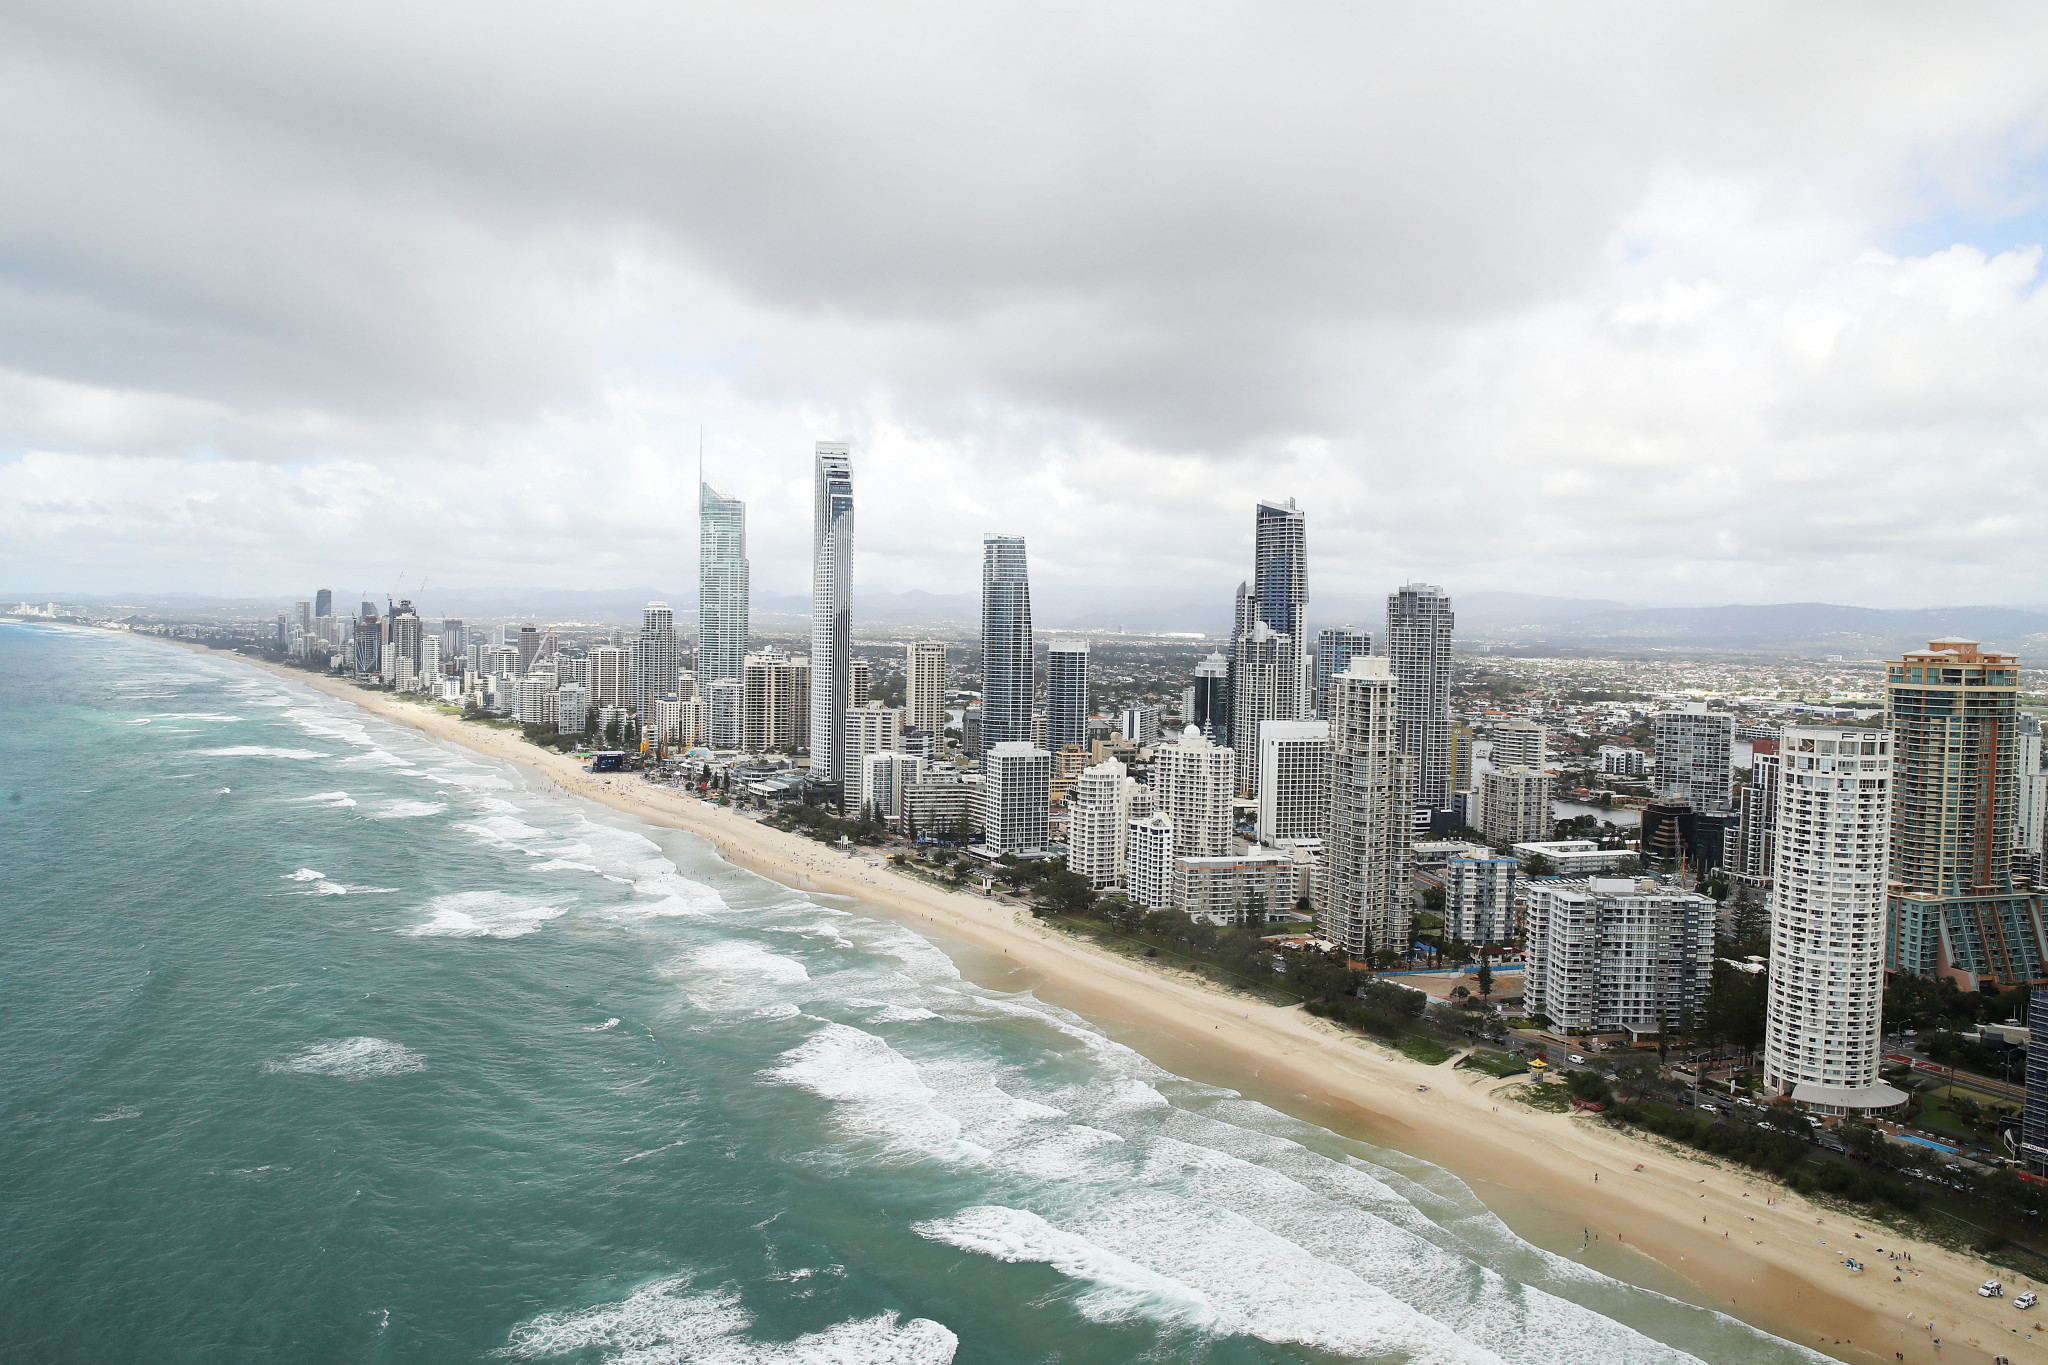 A successful Queensland bid for the 2032 Olympic Games could see competition take place at Gold Coast ©Getty Images